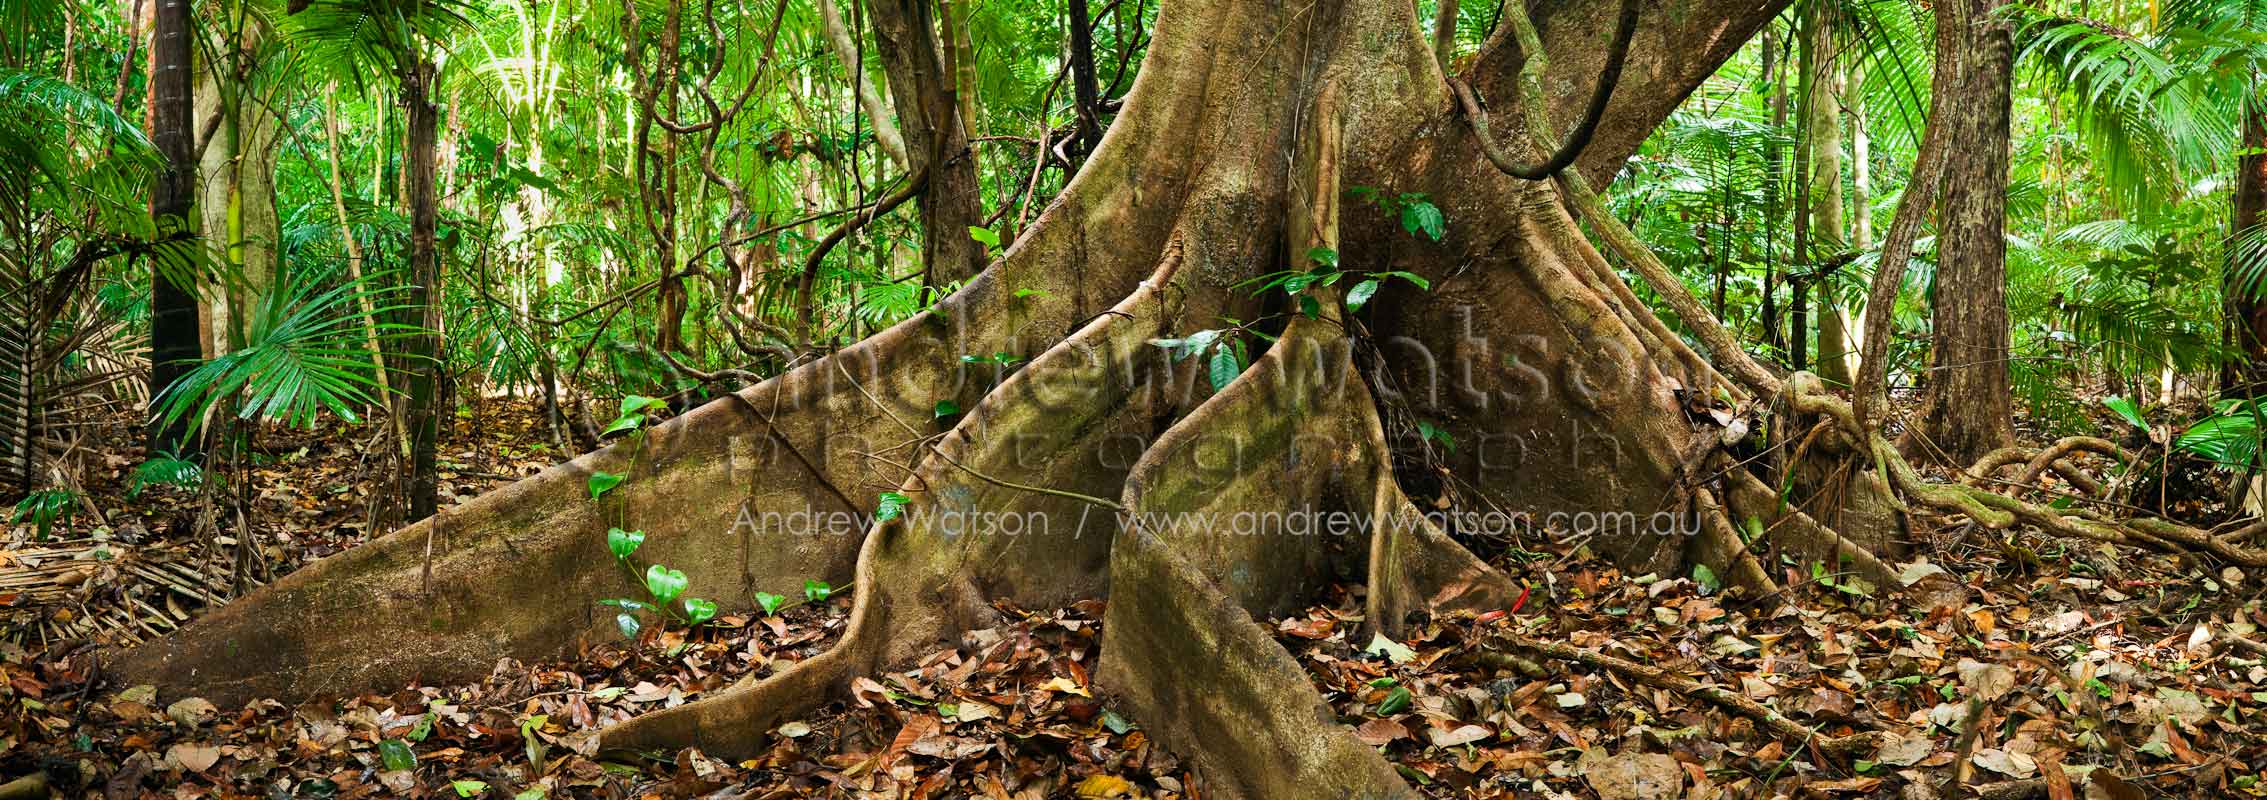 Butress roots on the rainforest floor Cape Tribulation, Daintree National Park, North QueenslandImage available for licensing or as a fine-art print... please enquire